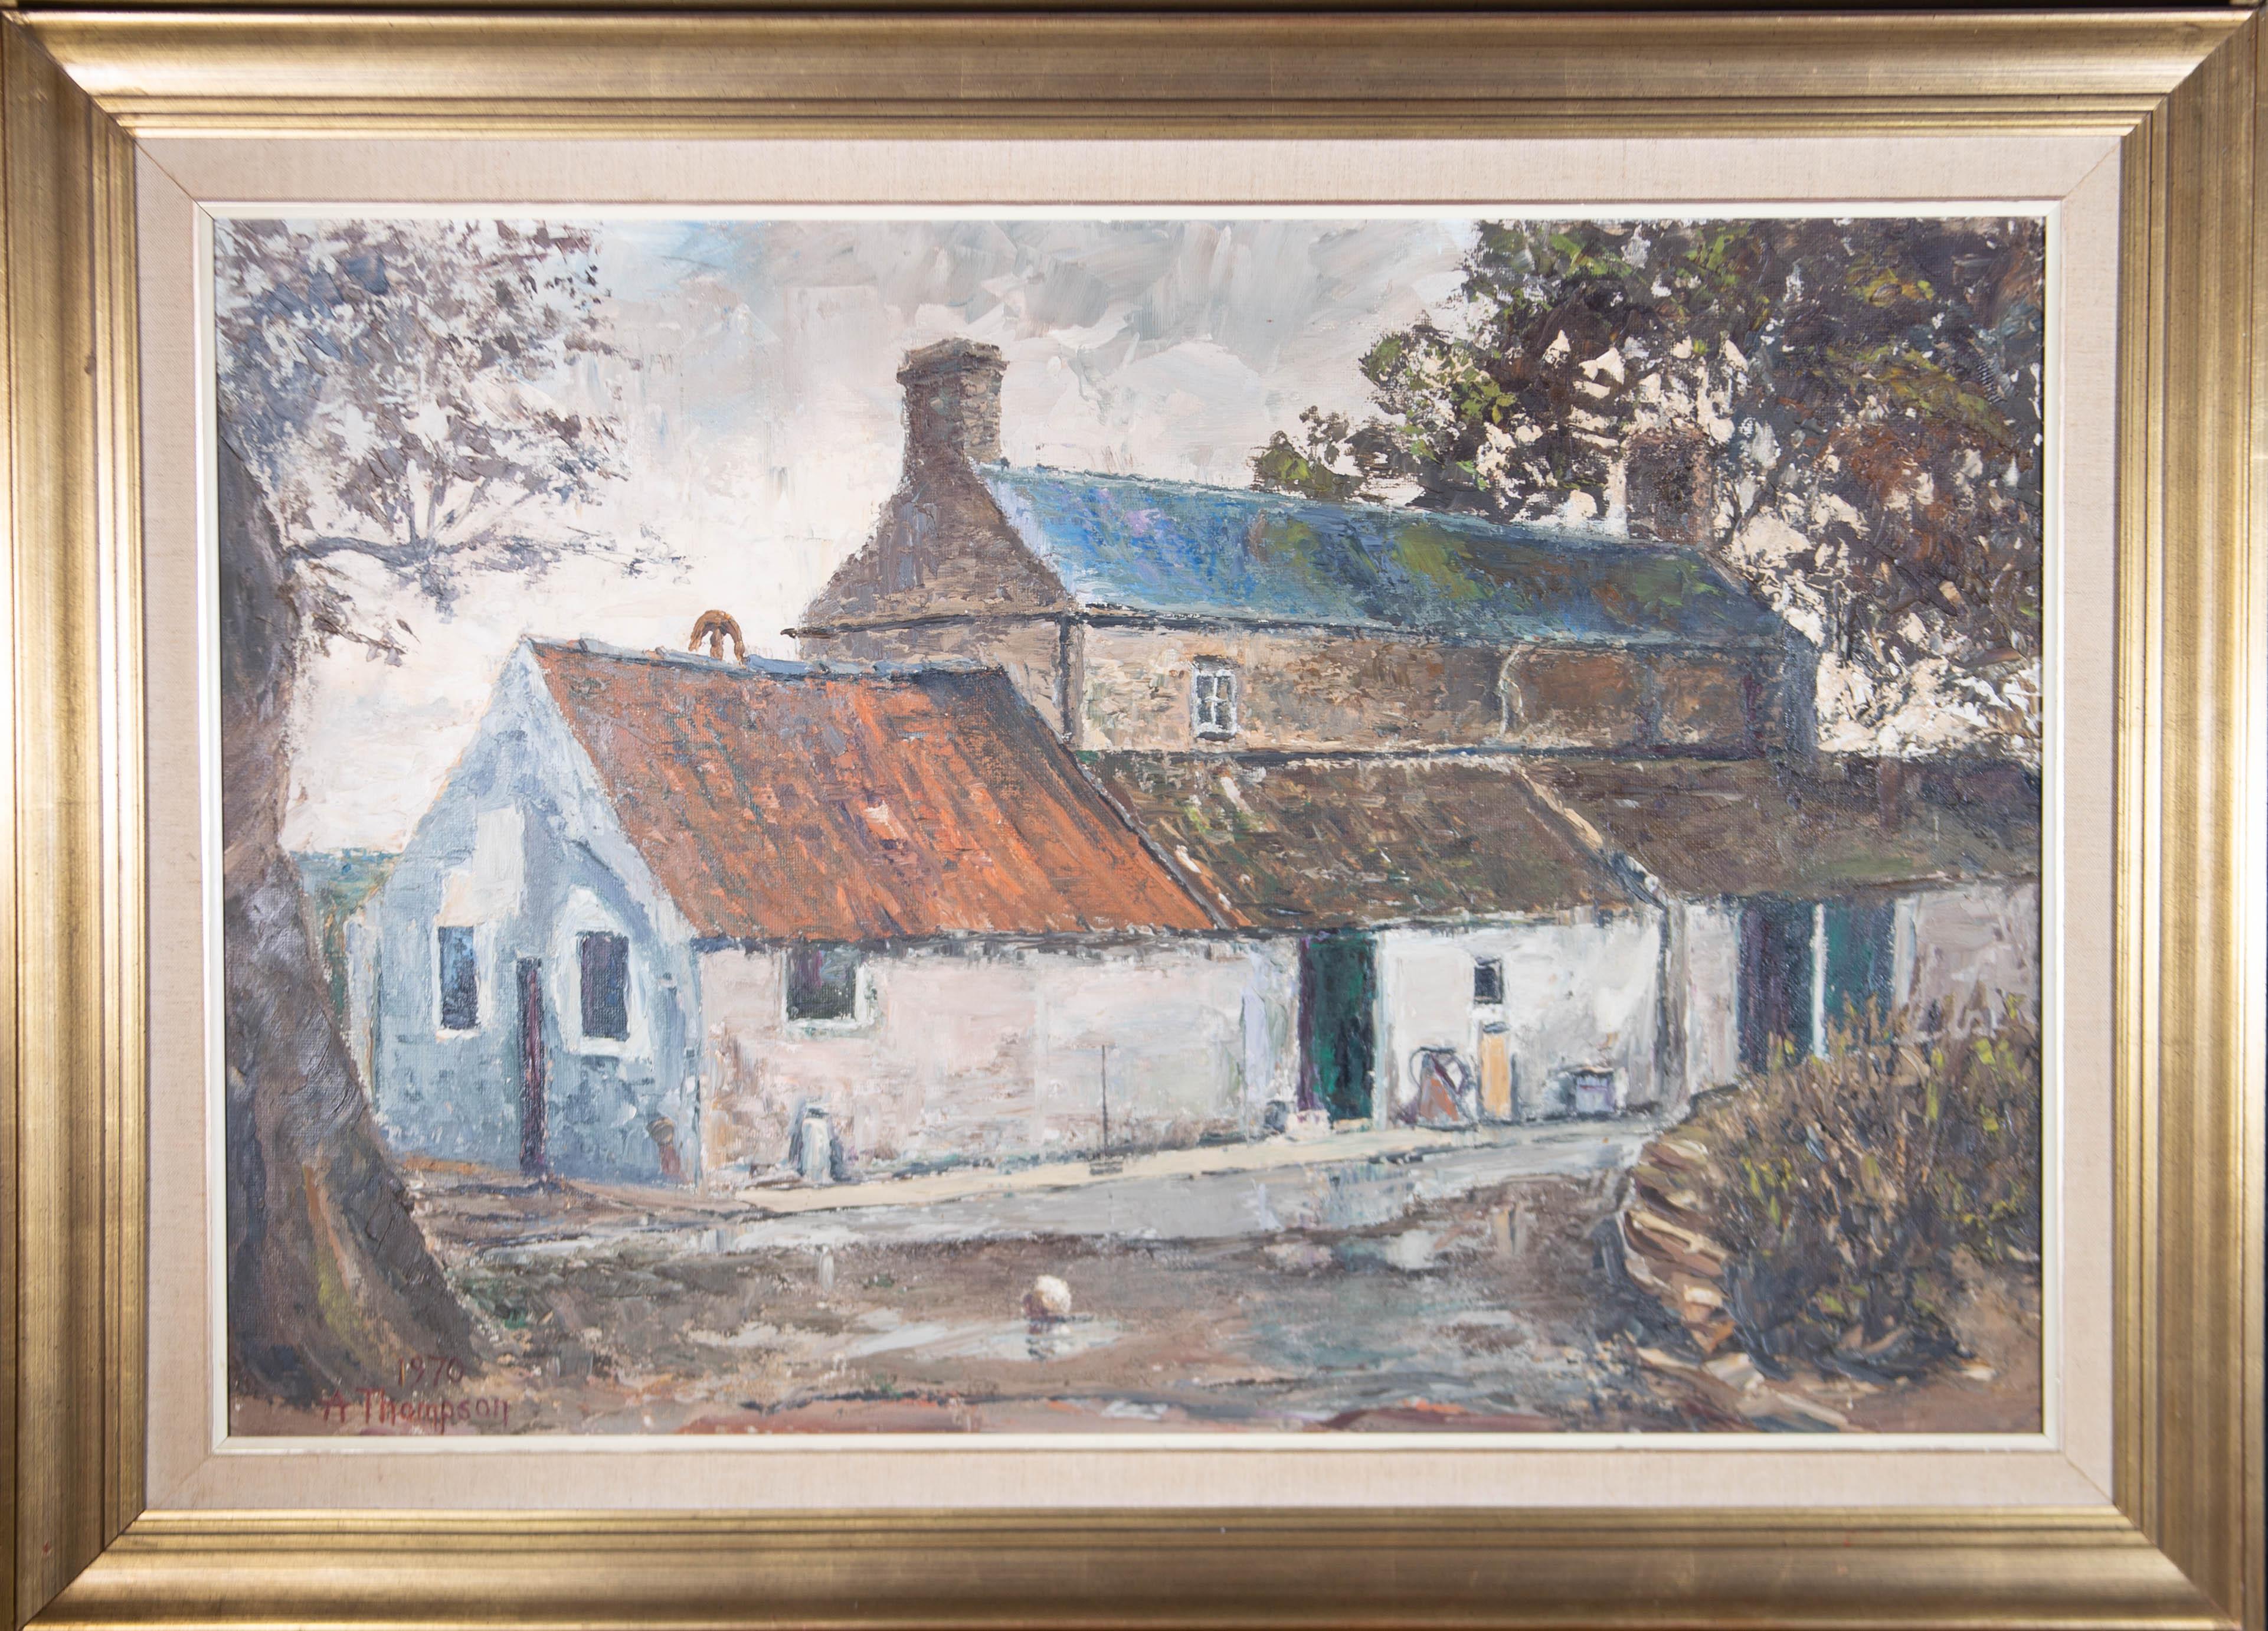 Unknown Landscape Painting - A. Thompson - Large 1970 Oil, The Farmhouse